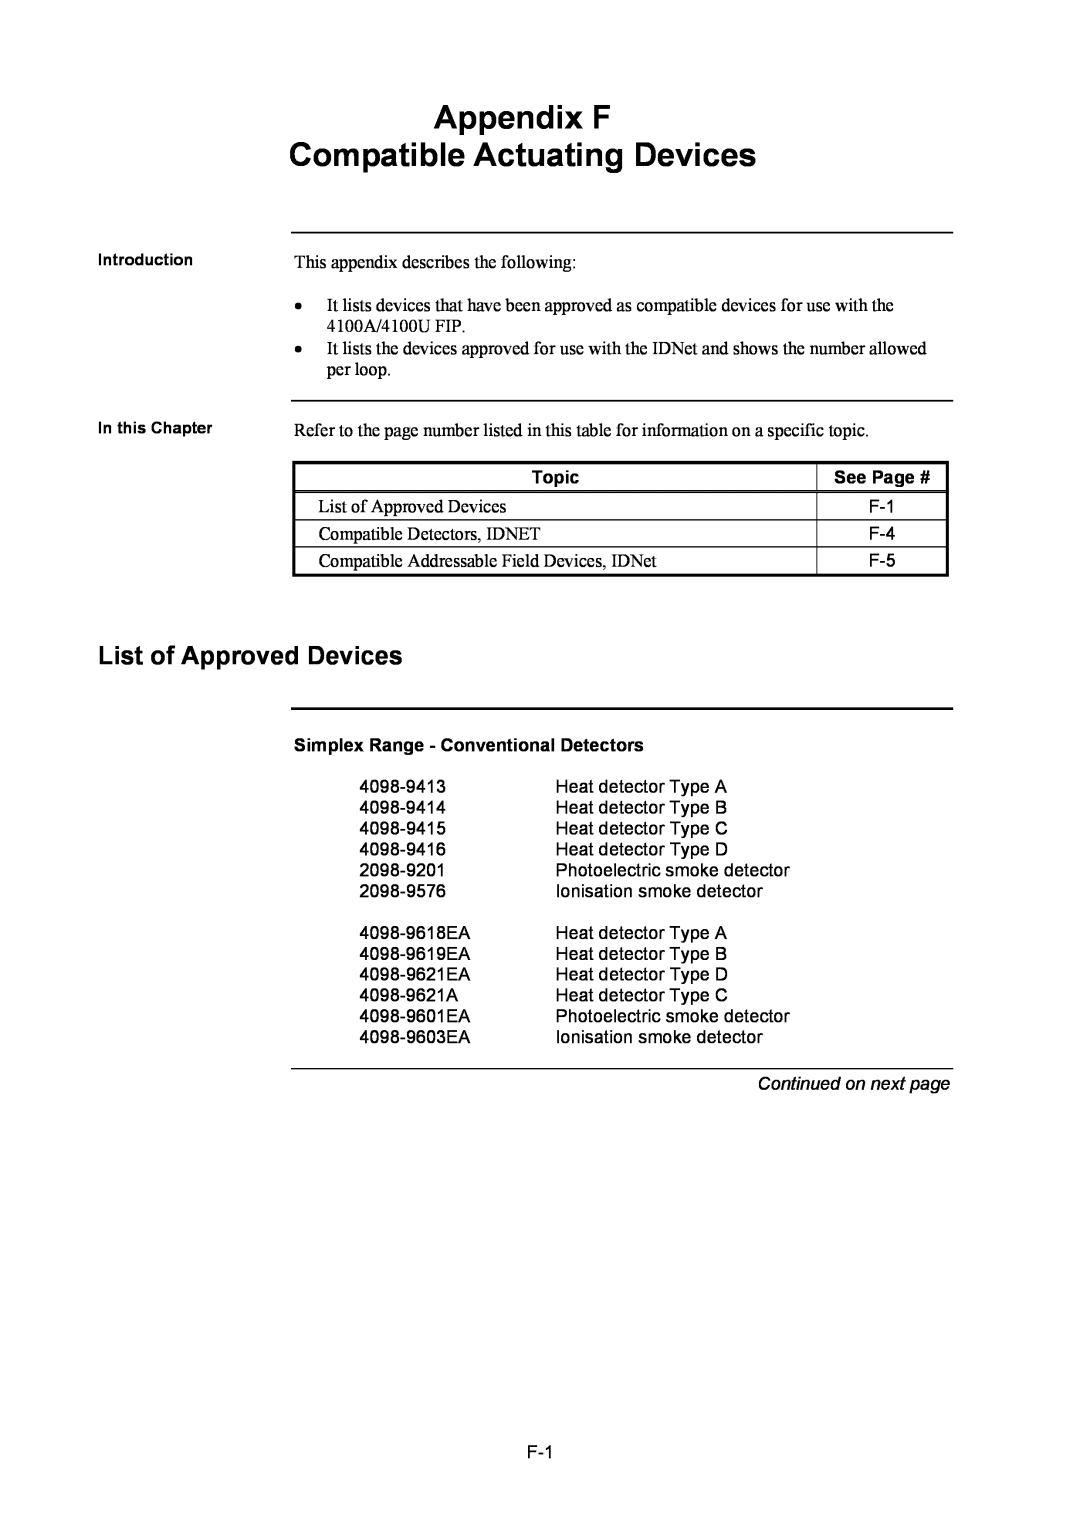 Tyco 4100U Appendix F Compatible Actuating Devices, List of Approved Devices, Topic, See Page #, Continued on next page 